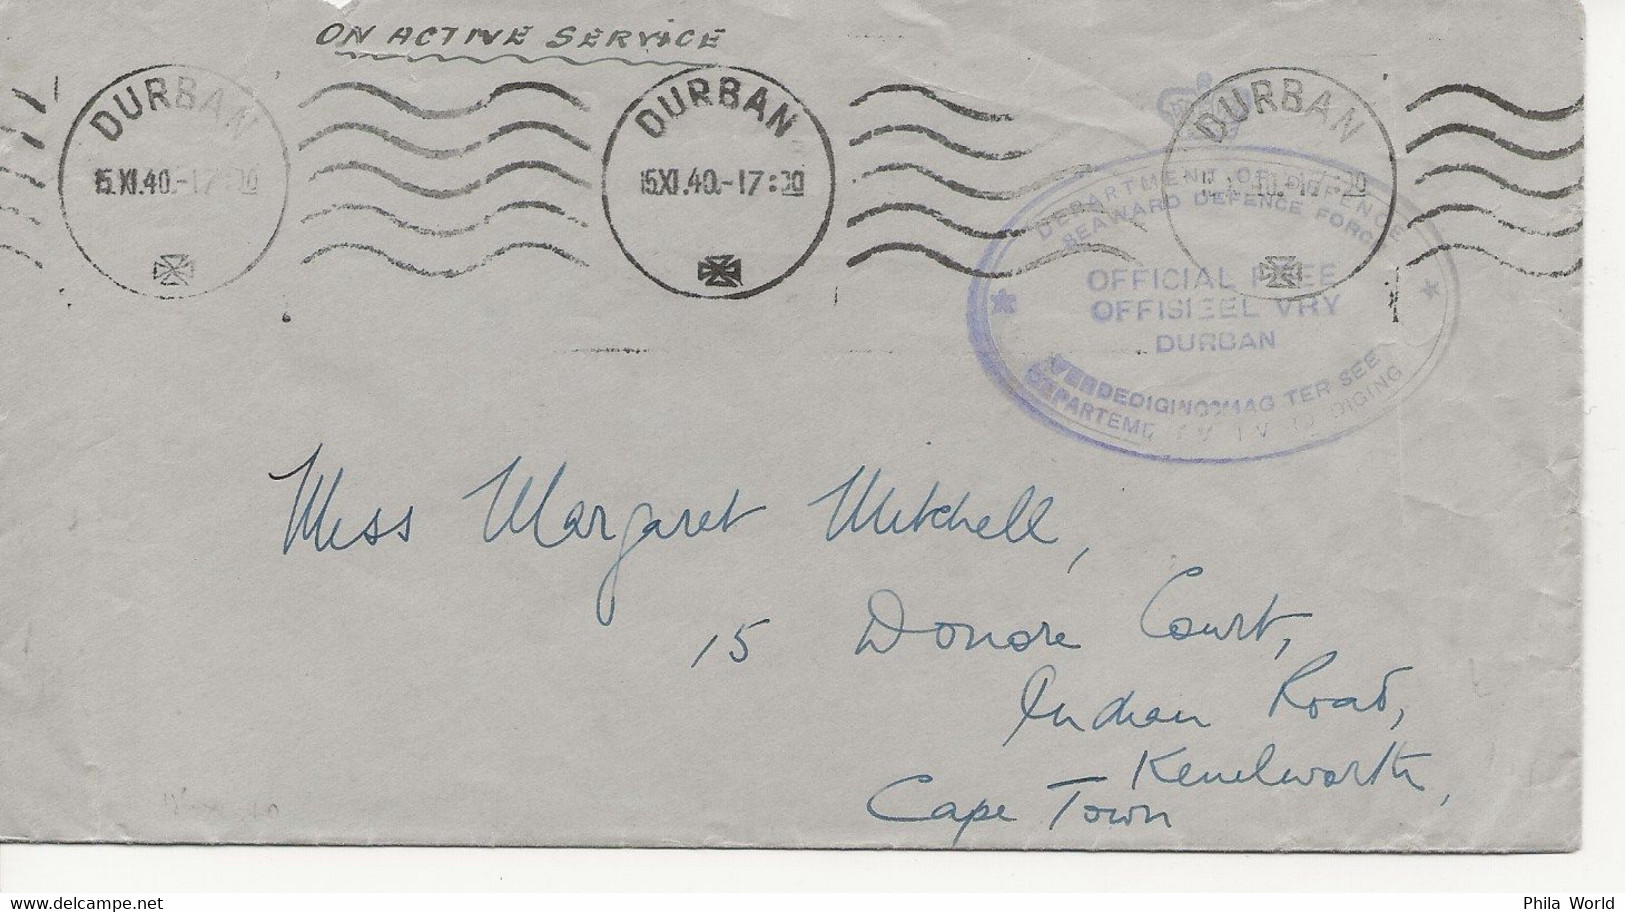 WW2 ON ACTIVE SERVICE NOV 1940 OFFICIAL FREE CACHET On COVER From DURBAN To CAPE TOWN South Africa - Barche